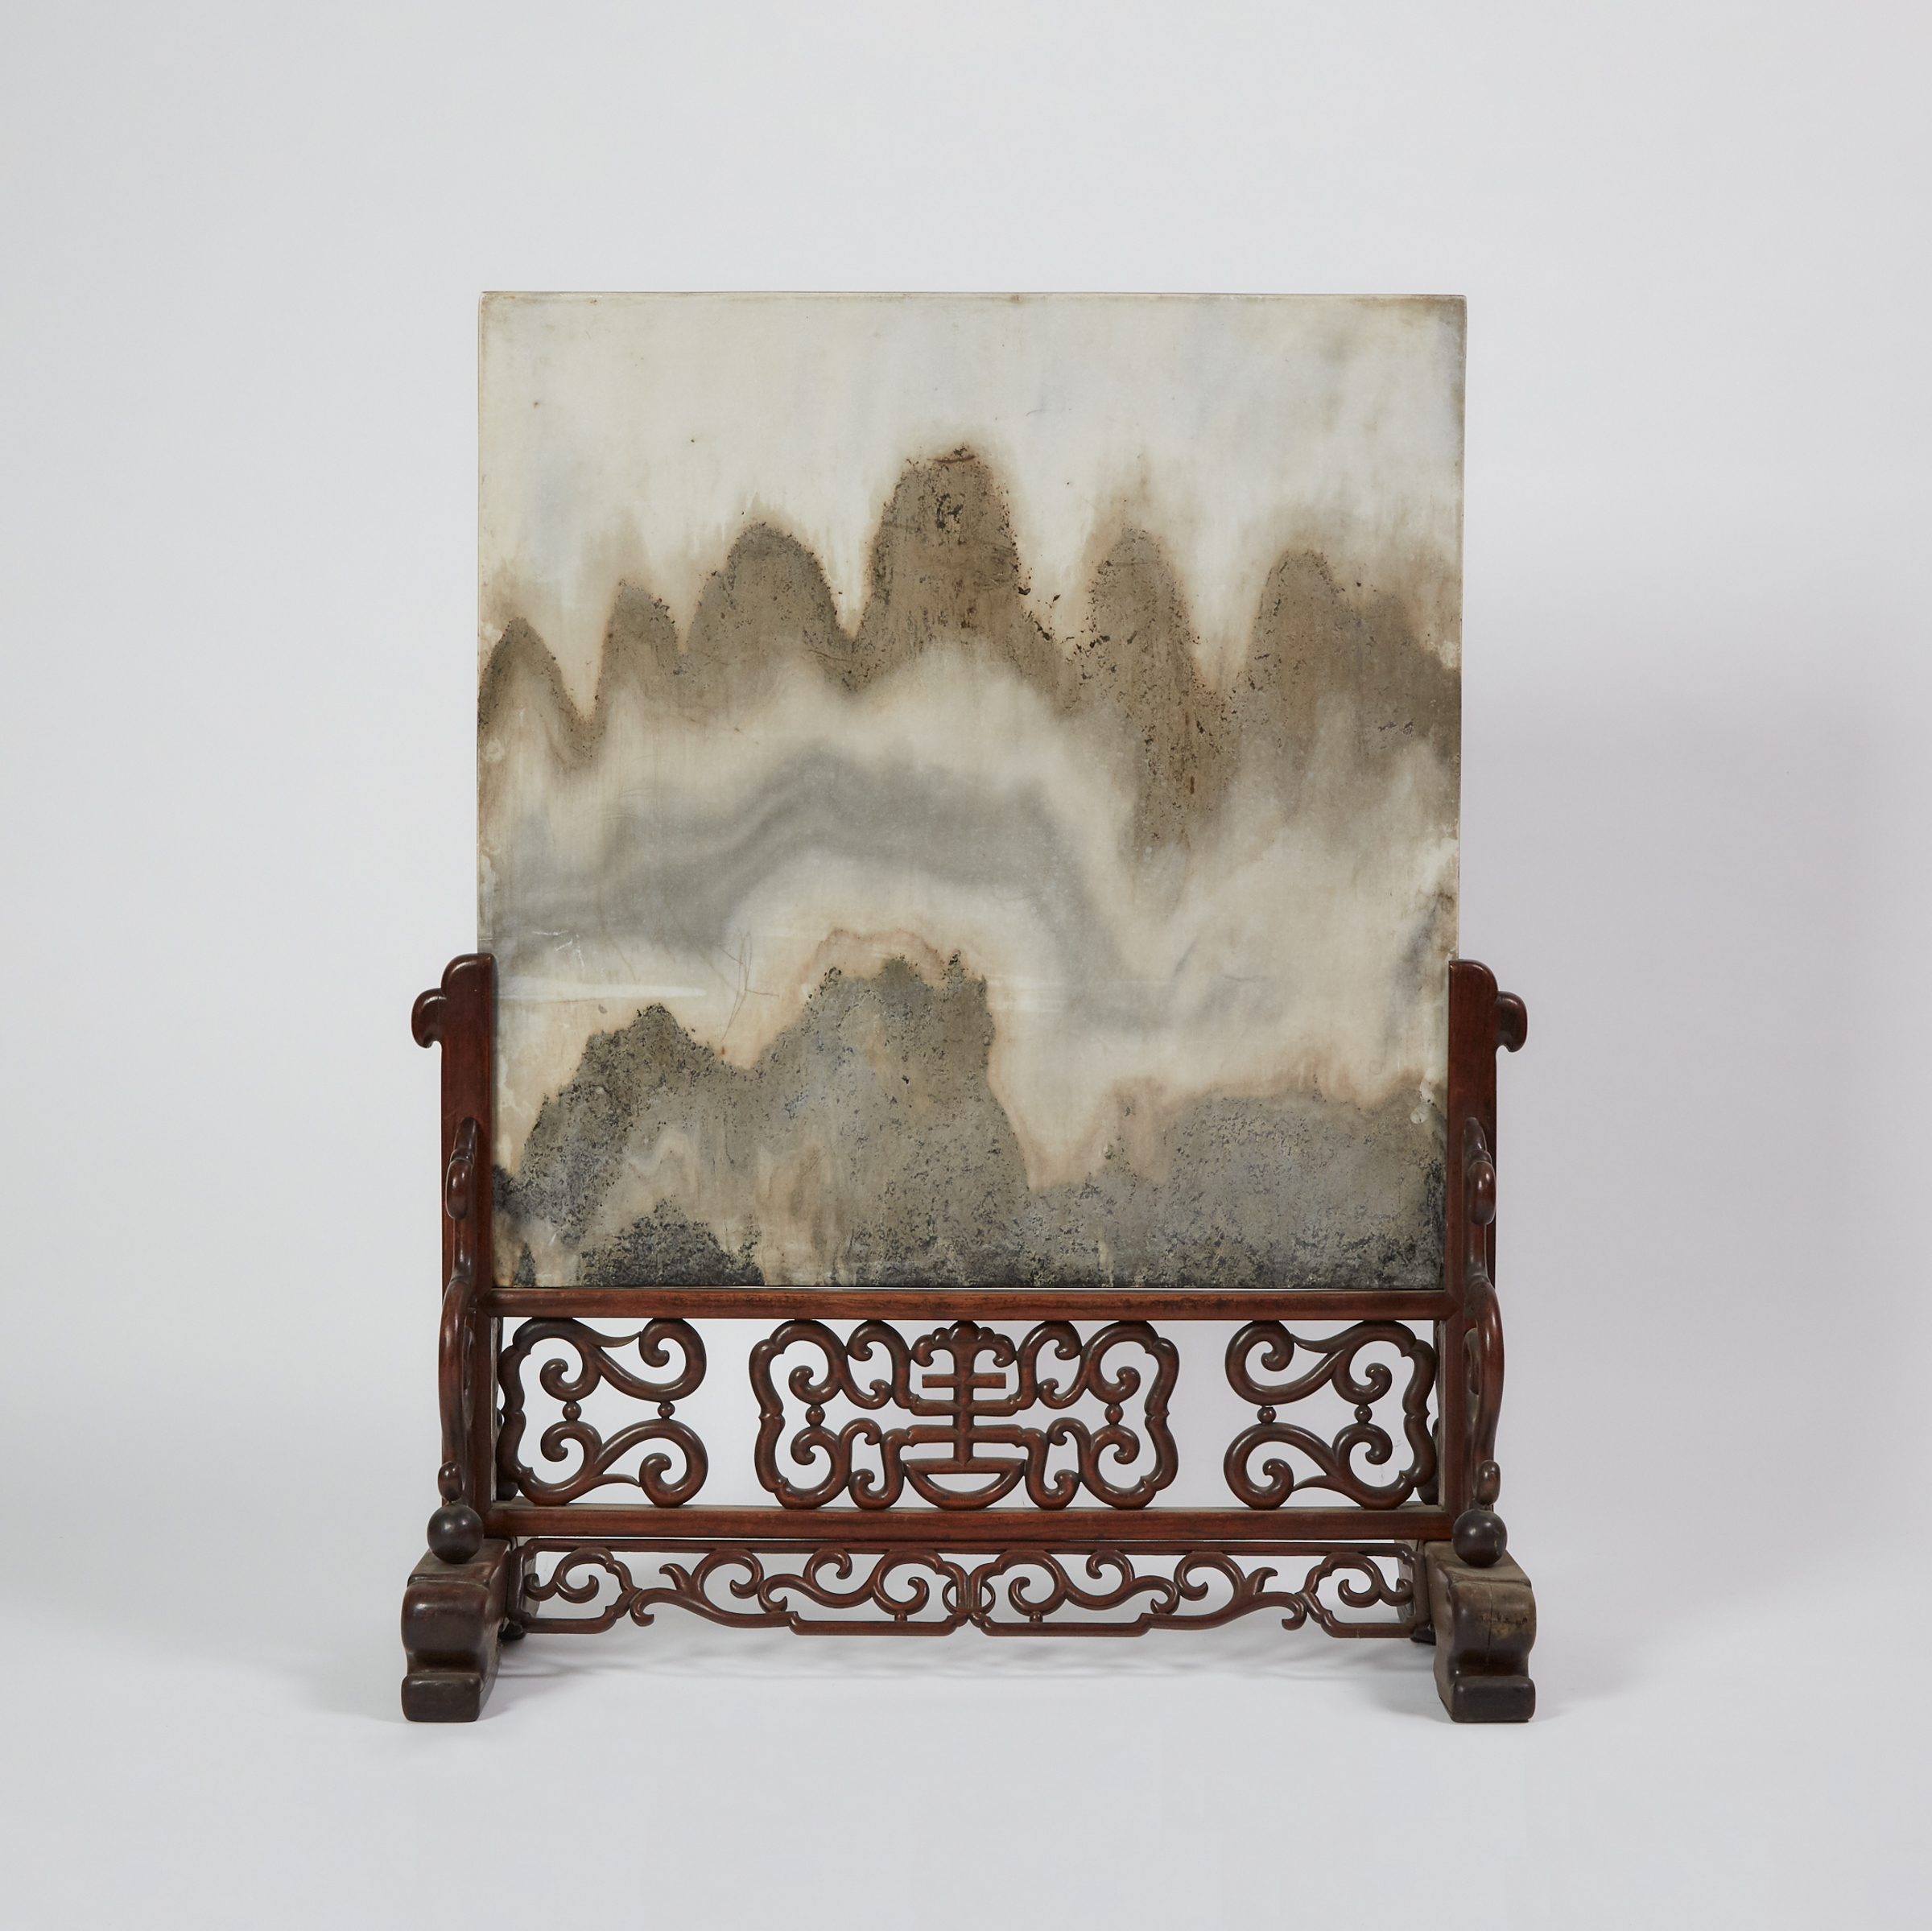 A Large Marble 'Landscape' Table Screen, 19th Century